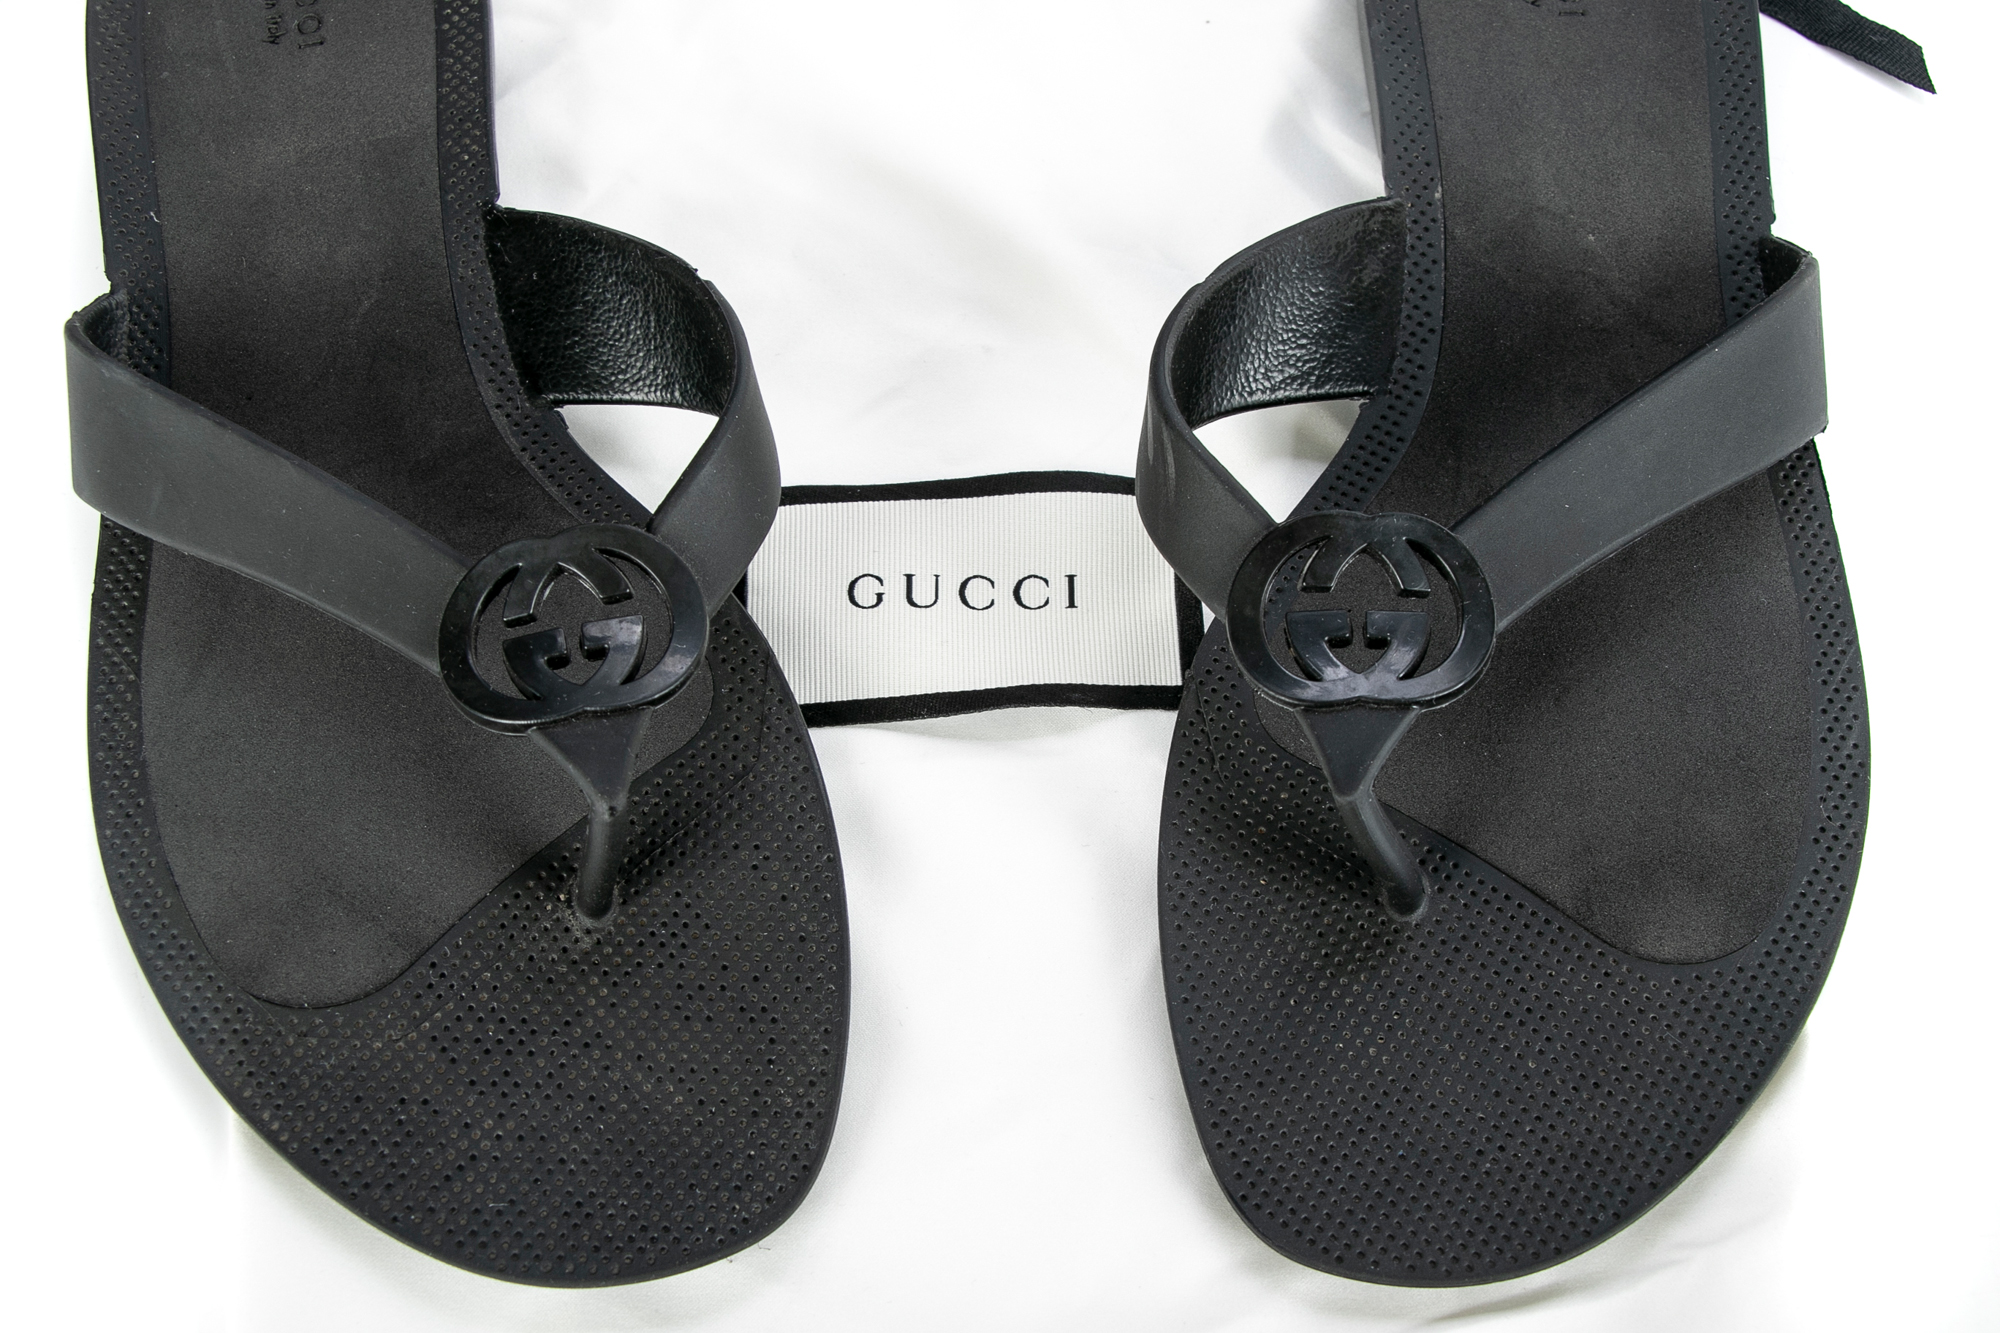 Gucci Pair Of Black Rubber Thong Sandals, Approximate Size 38